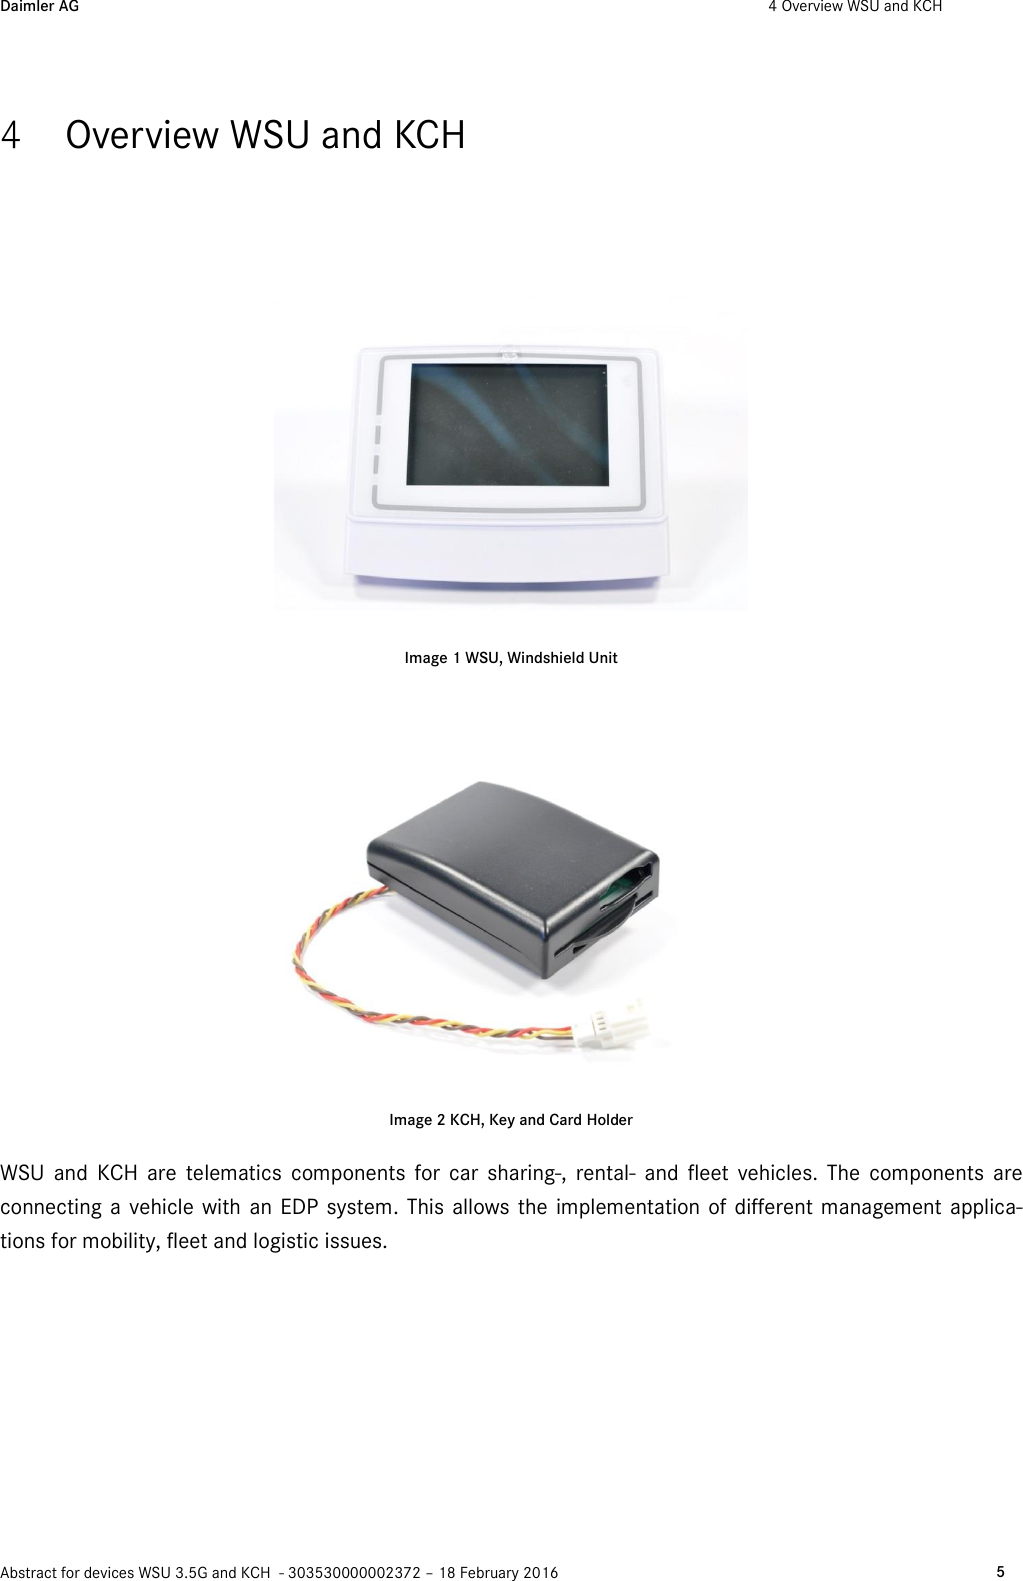 Daimler AG  4 Overview WSU and KCH    Abstract for devices WSU 3.5G and KCH  - 303530000002372 – 18 February 2016   5  4 Overview WSU and KCH  Image 1 WSU, Windshield Unit   Image 2 KCH, Key and Card Holder WSU  and  KCH  are  telematics  components  for  car  sharing-,  rental-  and  fleet  vehicles.  The  components  are connecting a vehicle  with  an EDP  system. This allows the  implementation of different management applica-tions for mobility, fleet and logistic issues.  